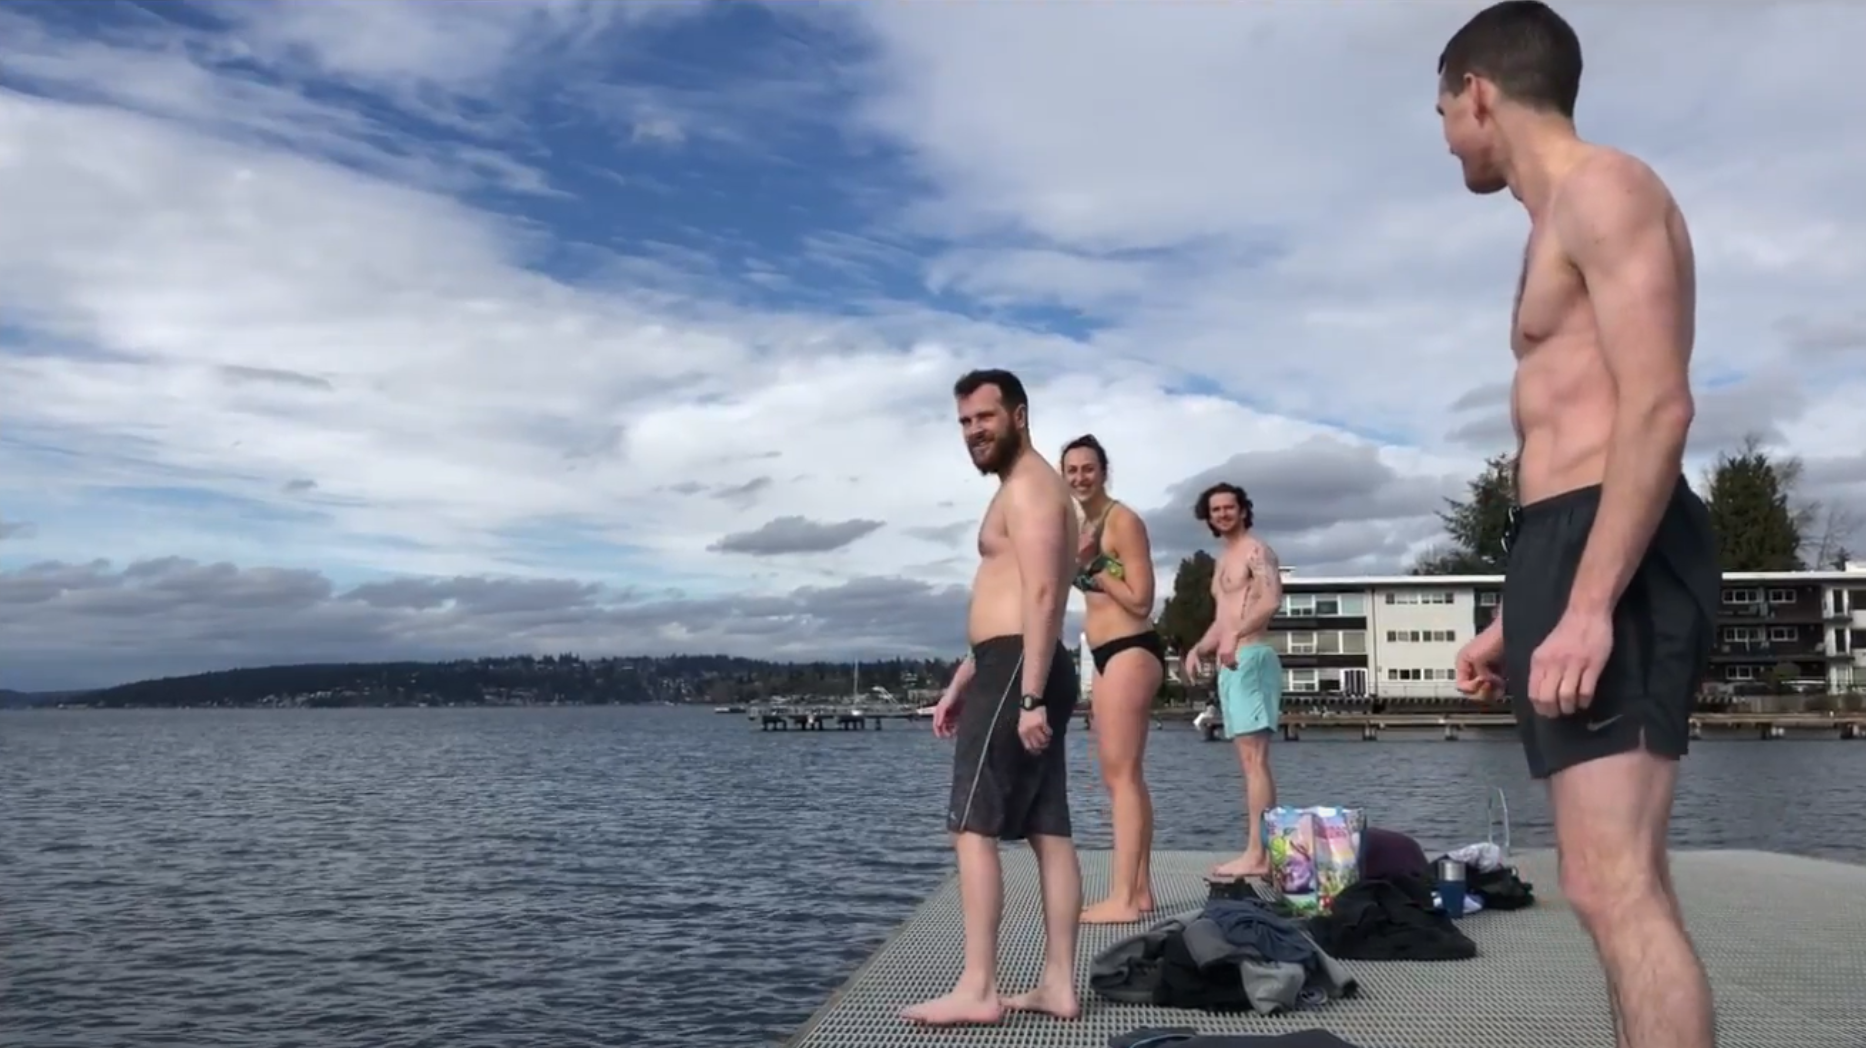 foster c4c members getting ready for a polar plunge into lake washington